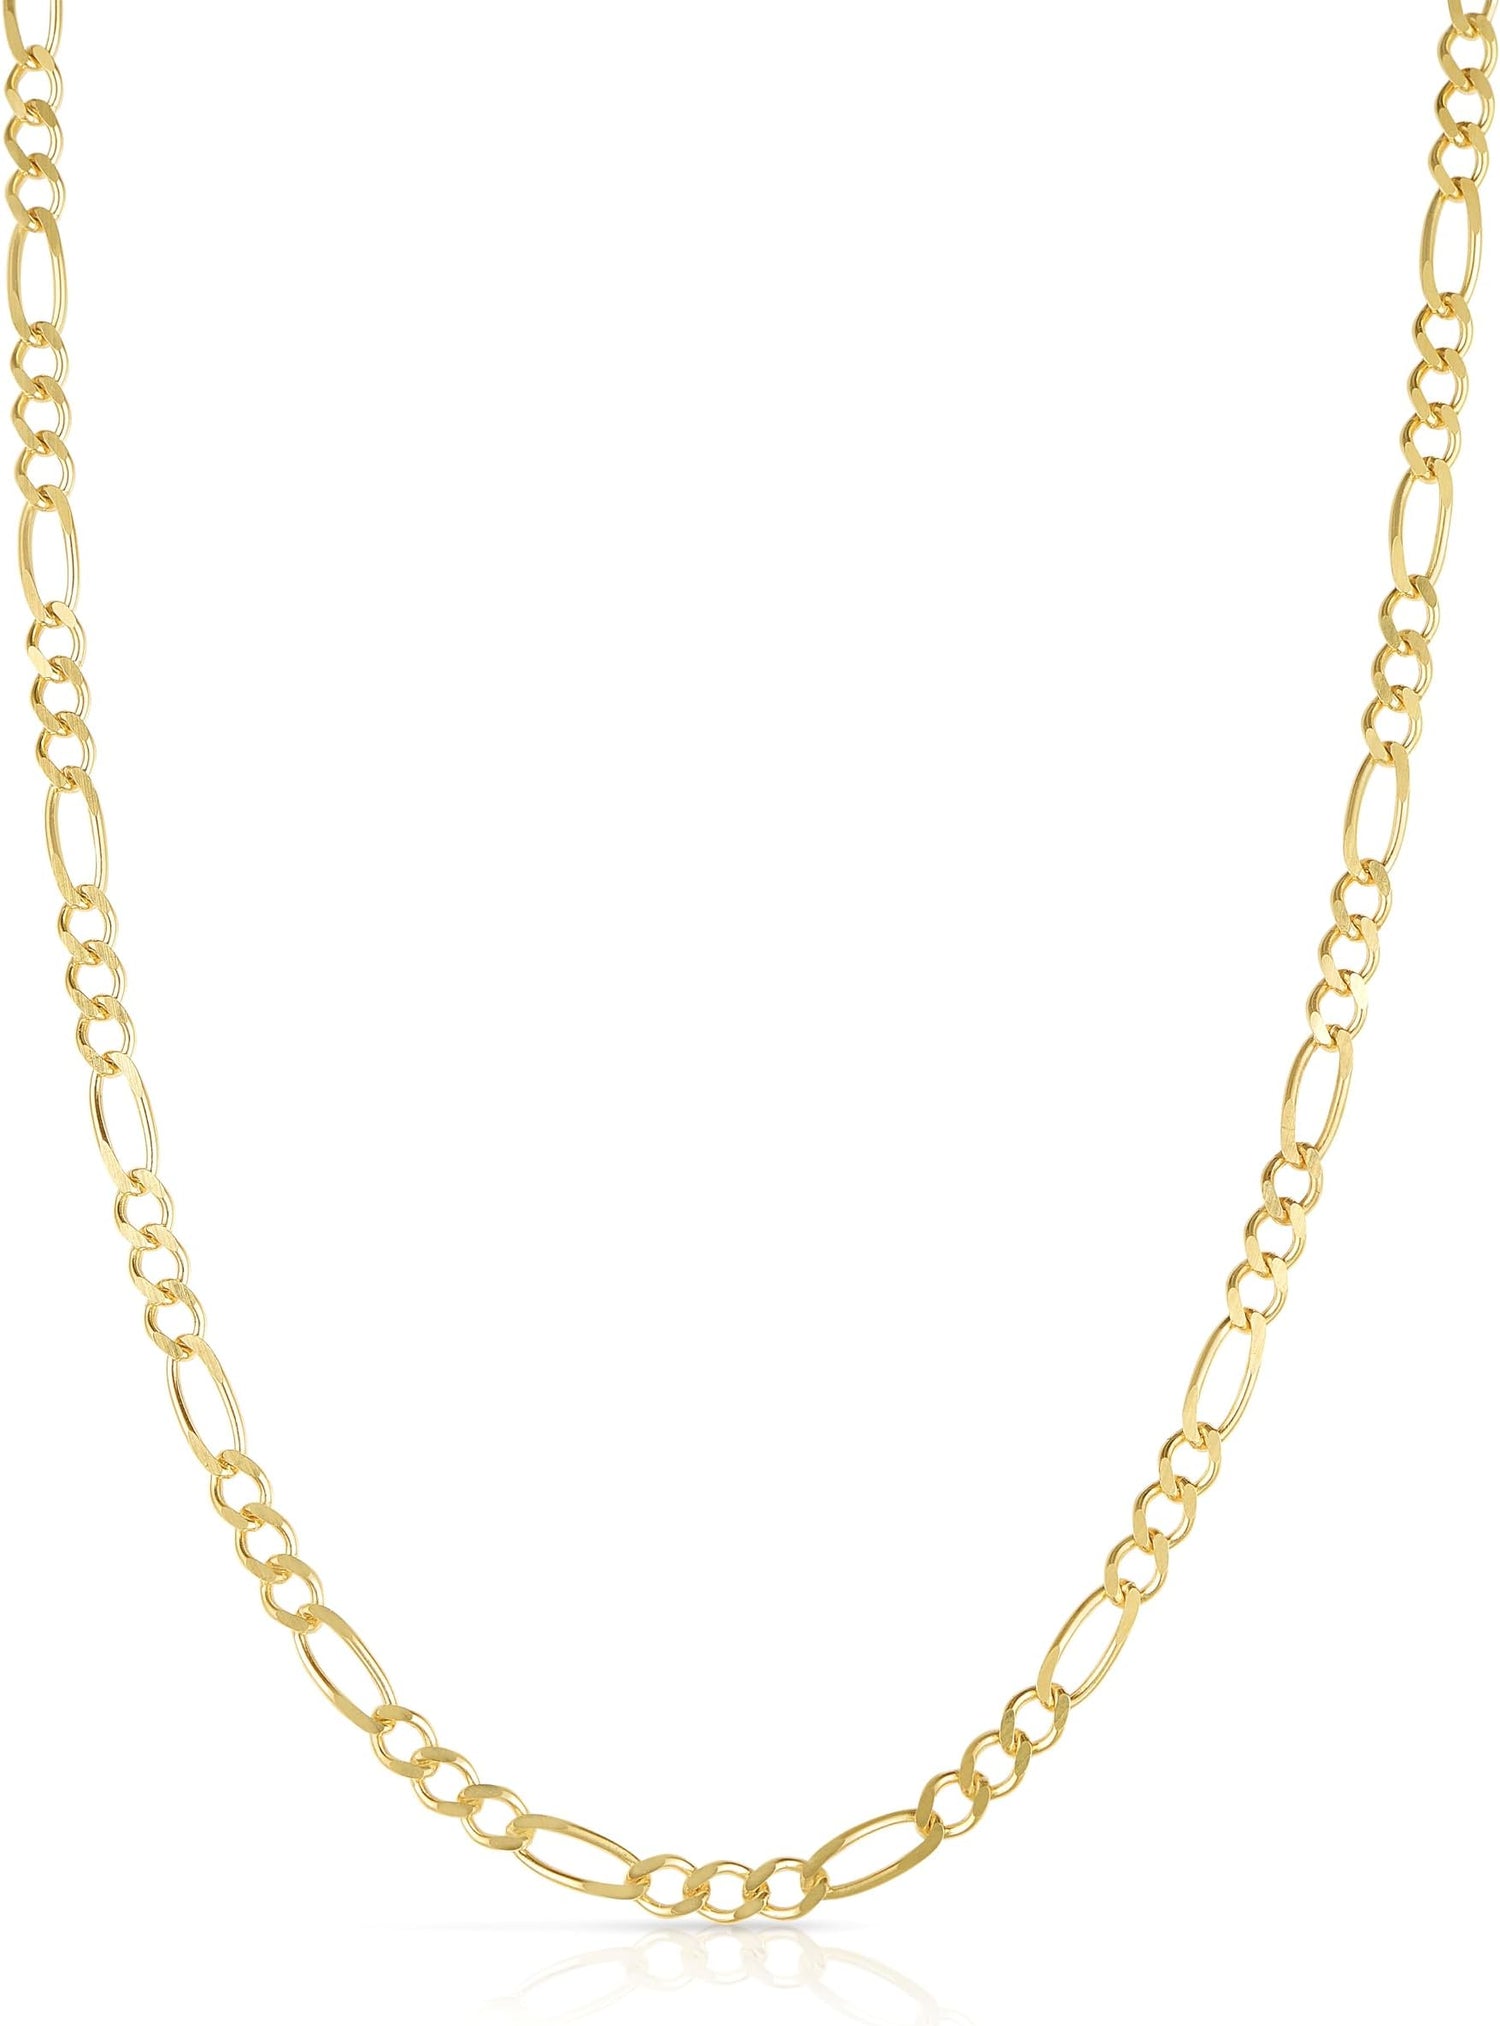 14k Yellow Gold or White Gold 2.5mm Solid Figaro Chain Necklace